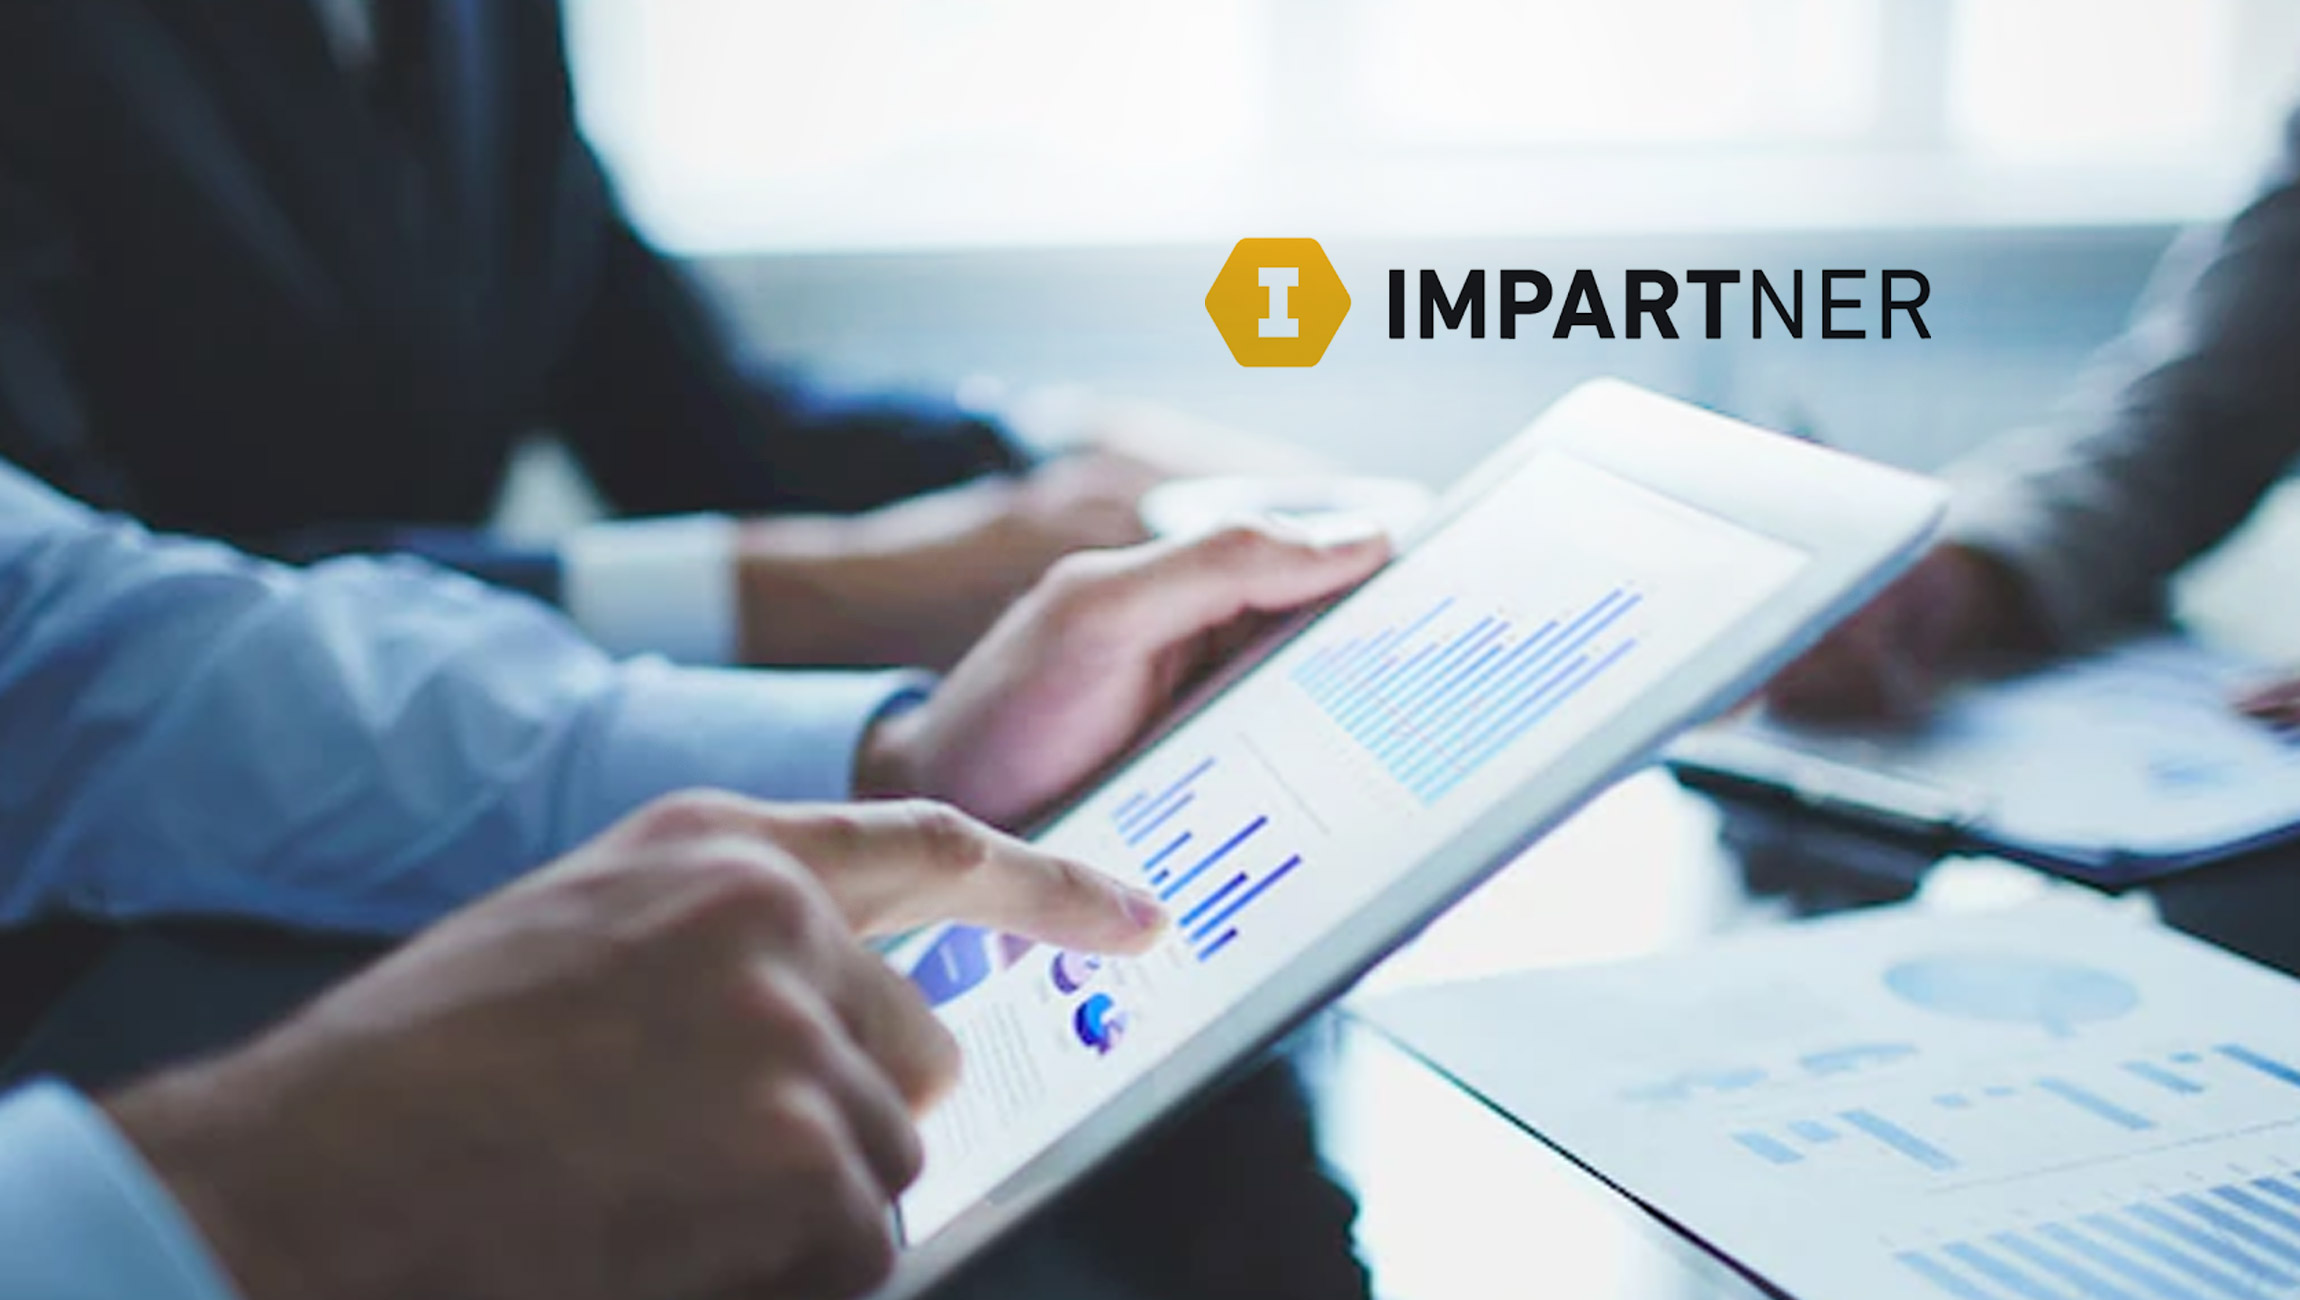 Impartner Claims No. 1 Ranking in Mid-Market Partner Management in G2 Summer Reports